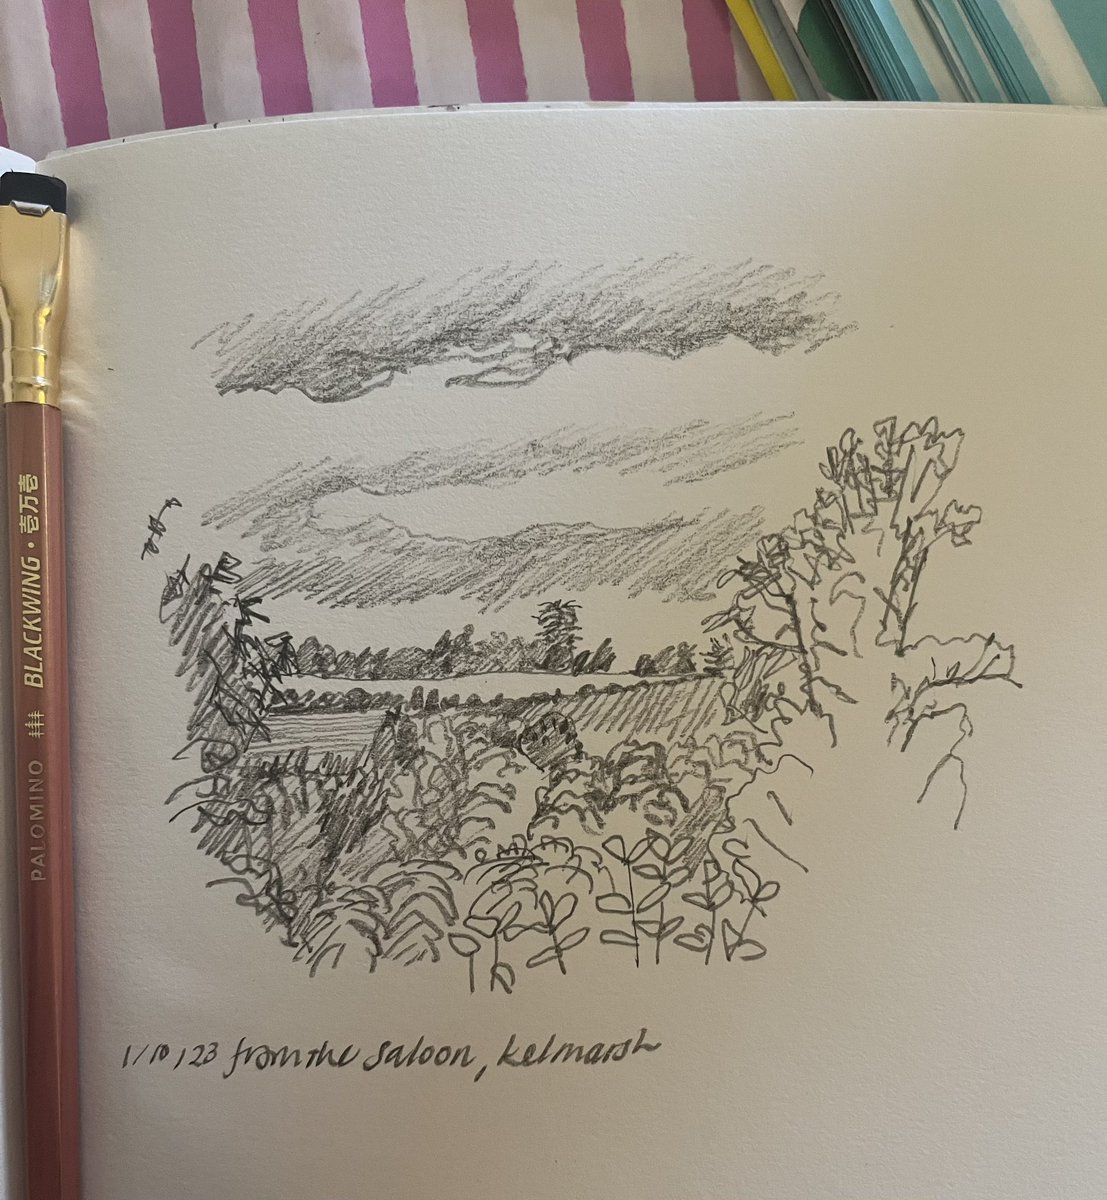 #drawing 4074 from the saloon, @KelmarshHall #thedailysketch